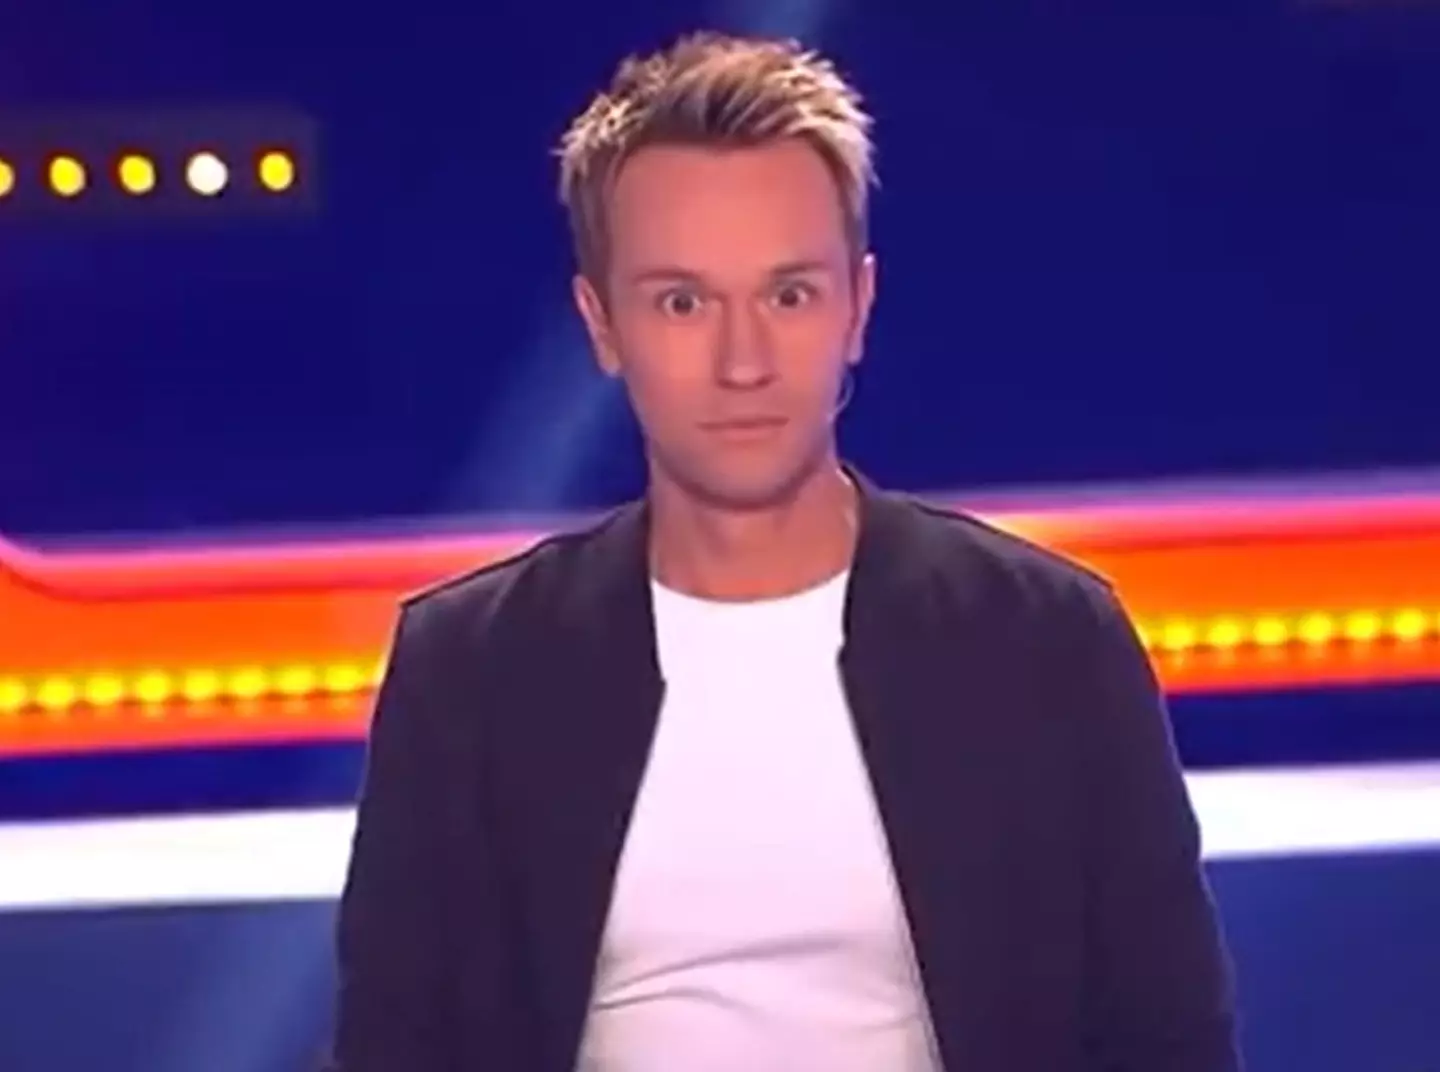 The face you make when you're hosting a quiz show and one of the contestants comes out with something xenophobic.